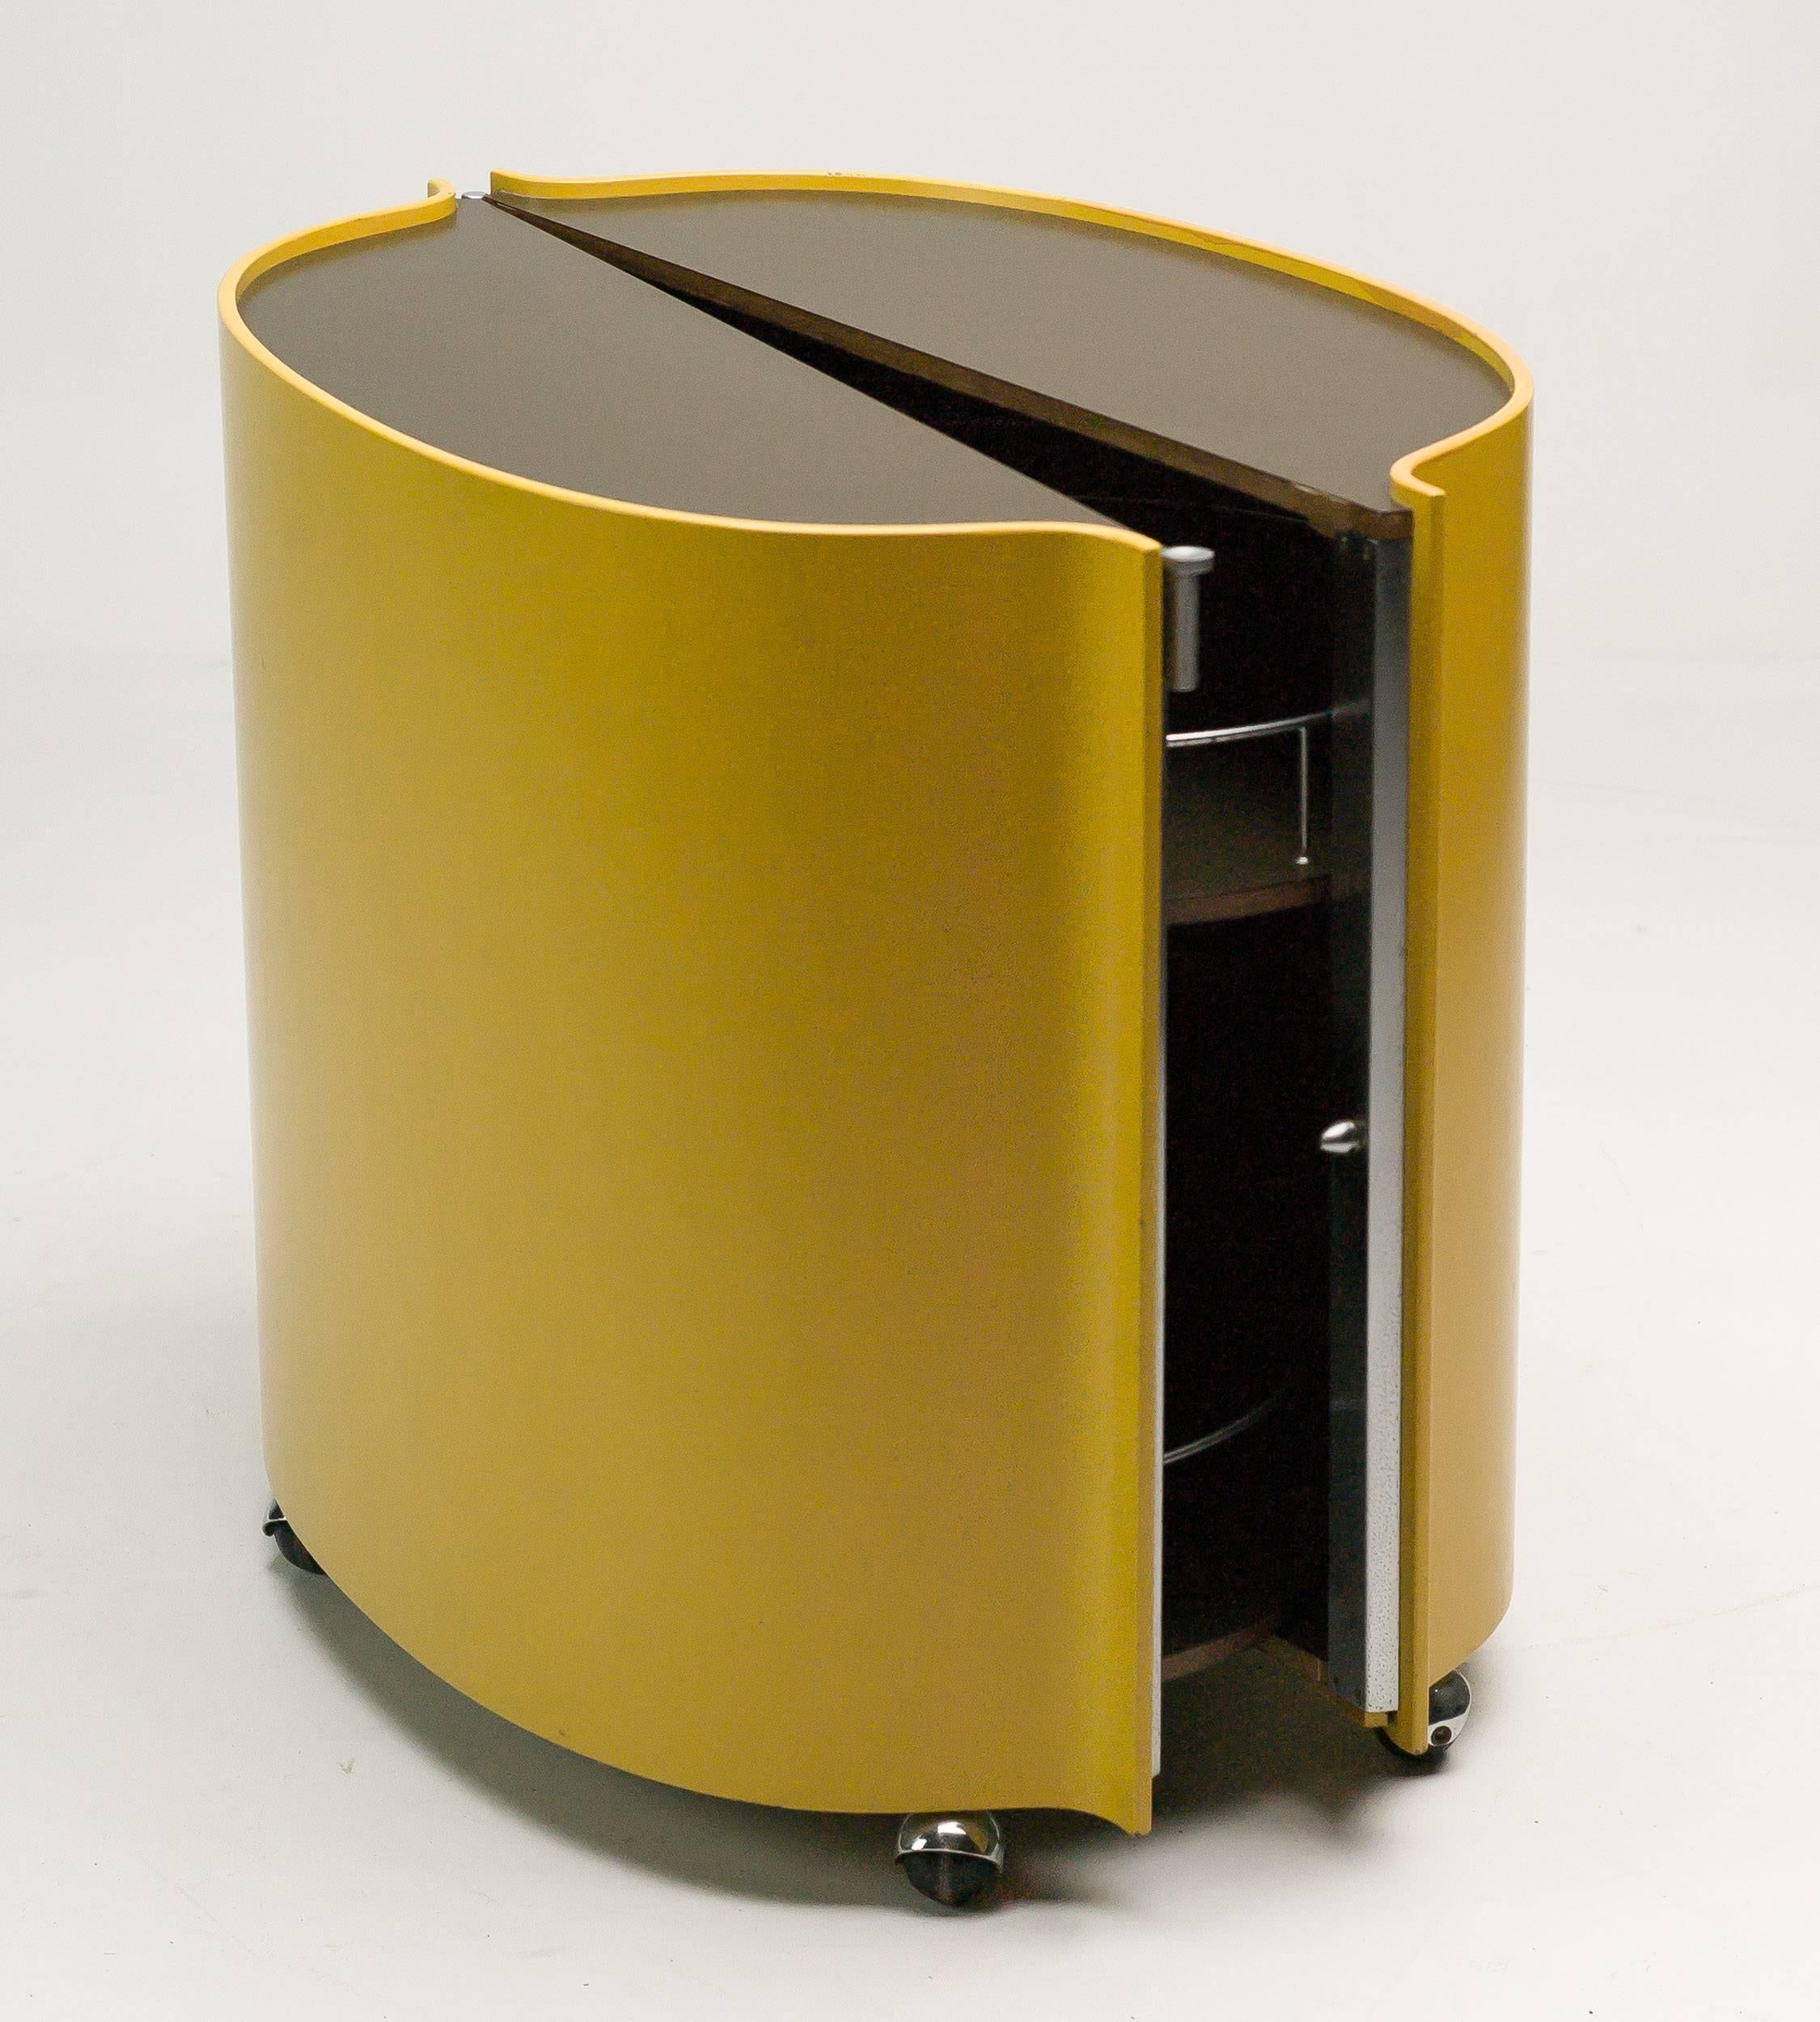 Bar on wheels by Eugenio Gerli for Tecno Milano, 1966.
Plywood outer panels lacquered in bold yellow. Beautiful bookmatched rosewood veneer inside, top and shelves with chocolate brown formica and matte chrome steel hardware. Matte chrome steel